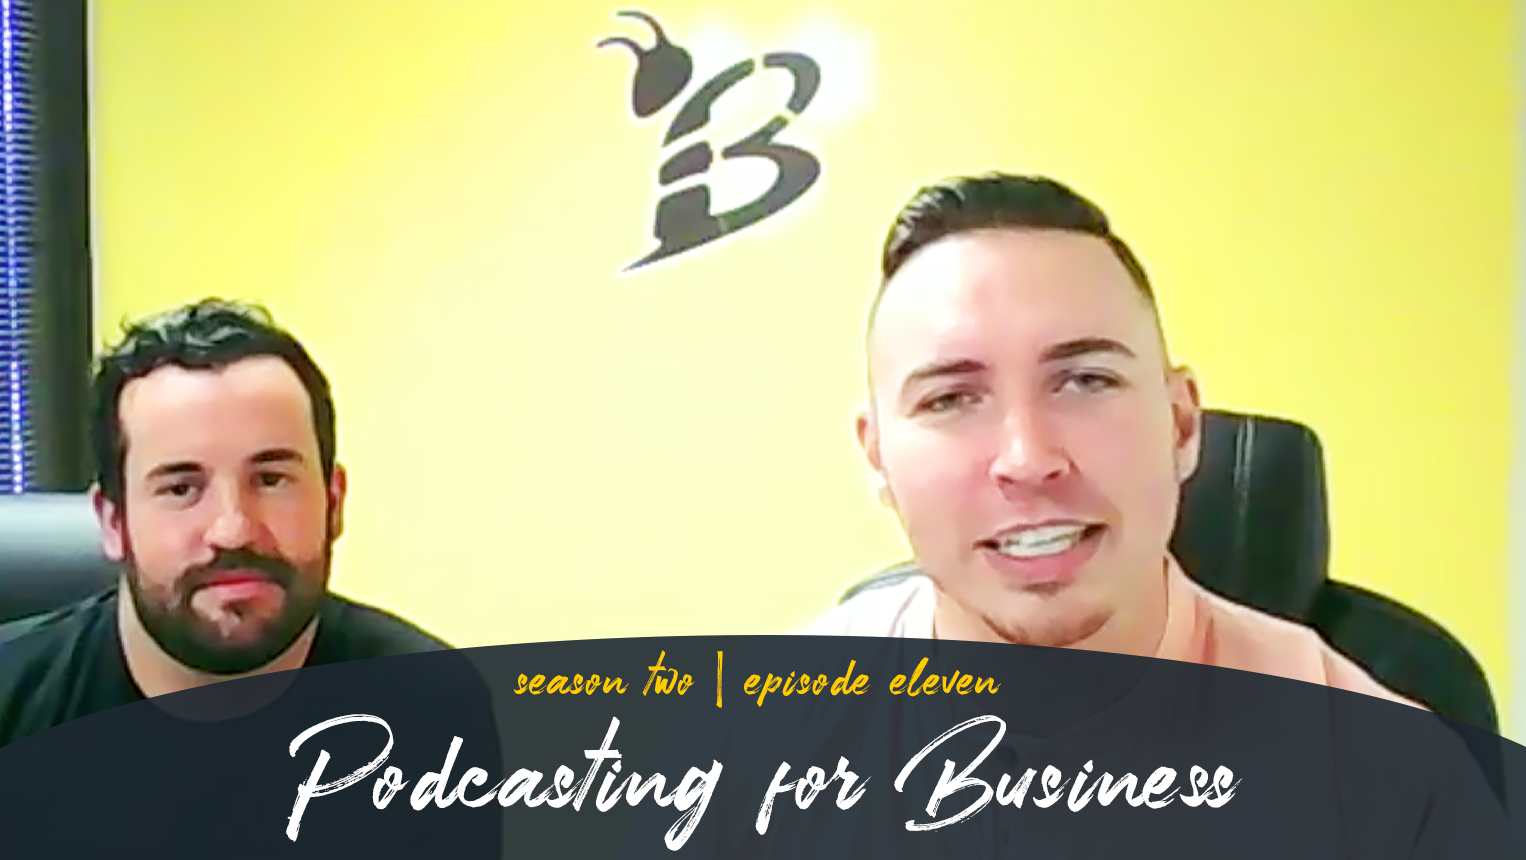 Podcasting for Business with Ben Baker of Your Brand Marketing